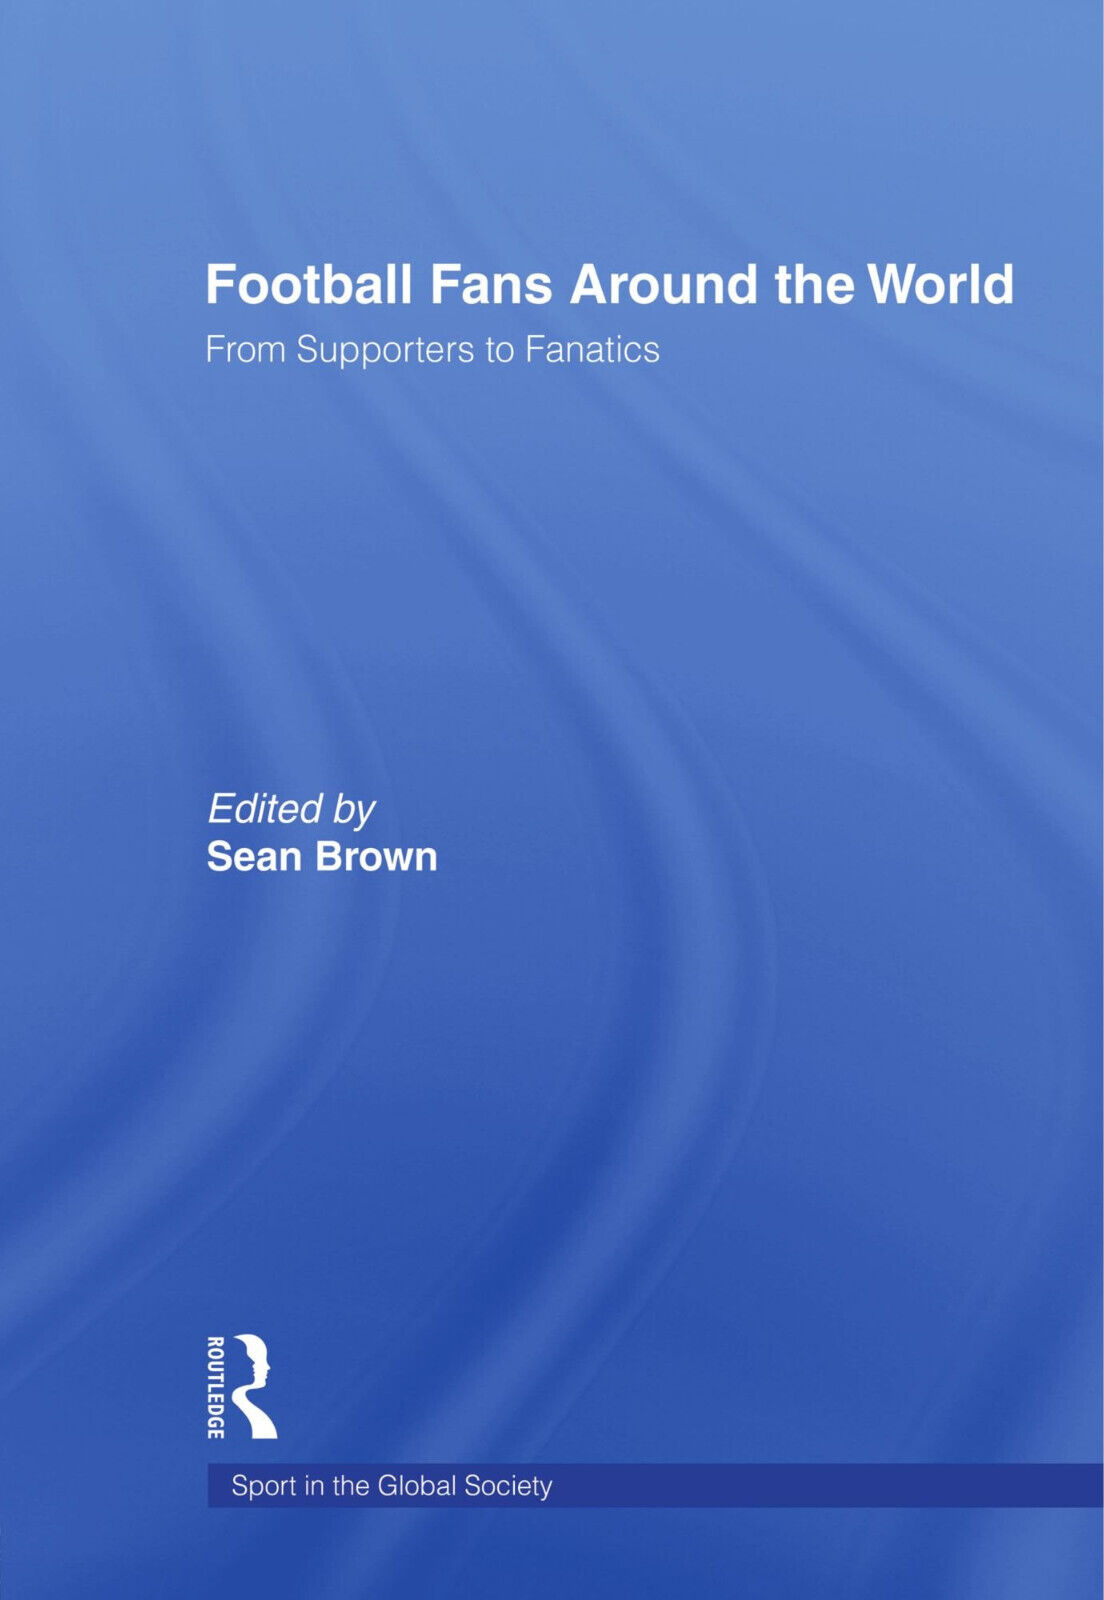 Football Fans Around the World - Sean Brown - Routledge, 2008